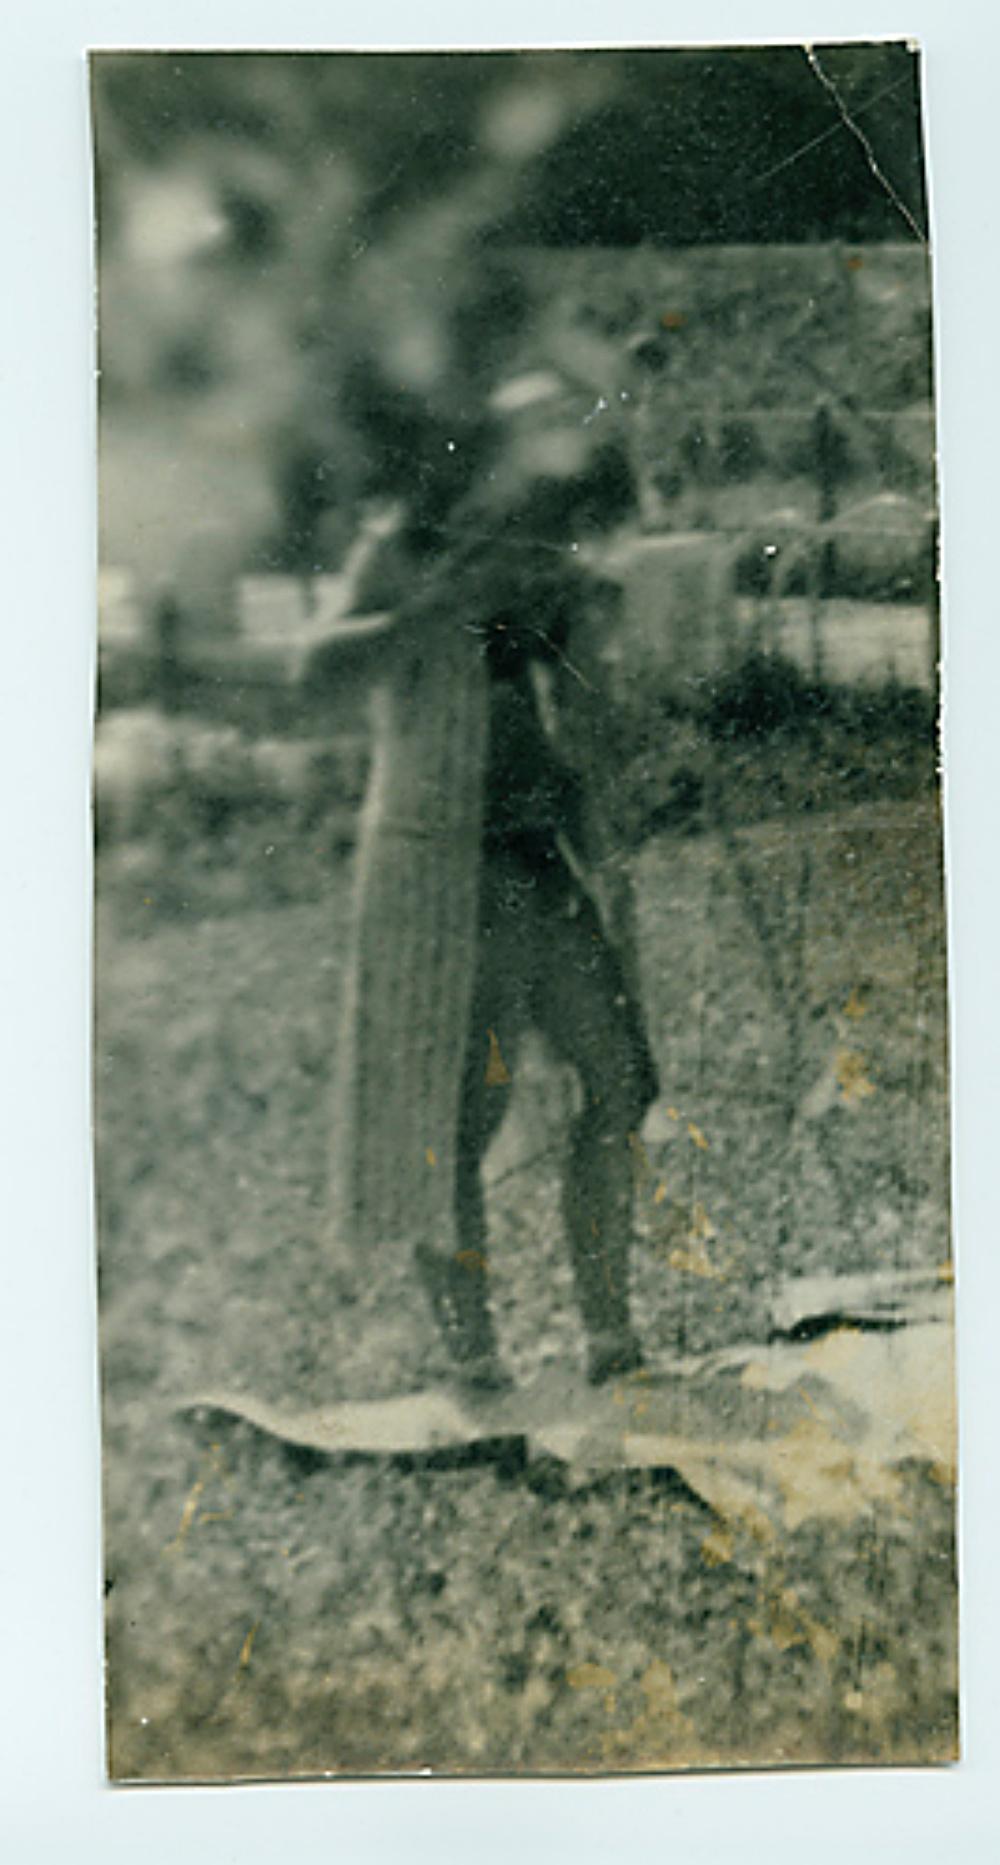 Miroslav Tichý (*1926, Czech Republic) 
Untitled, MT Inv. No 7-10-51 
Unknown, ca. 1970-1990
Silver Gelatin Print 
Sheet 16 x 8,4 cm (6 1/4 x 3 1/4 in.)
Unique
Print only

Tichý, practically reinventing photography from scratch, reconstitutes